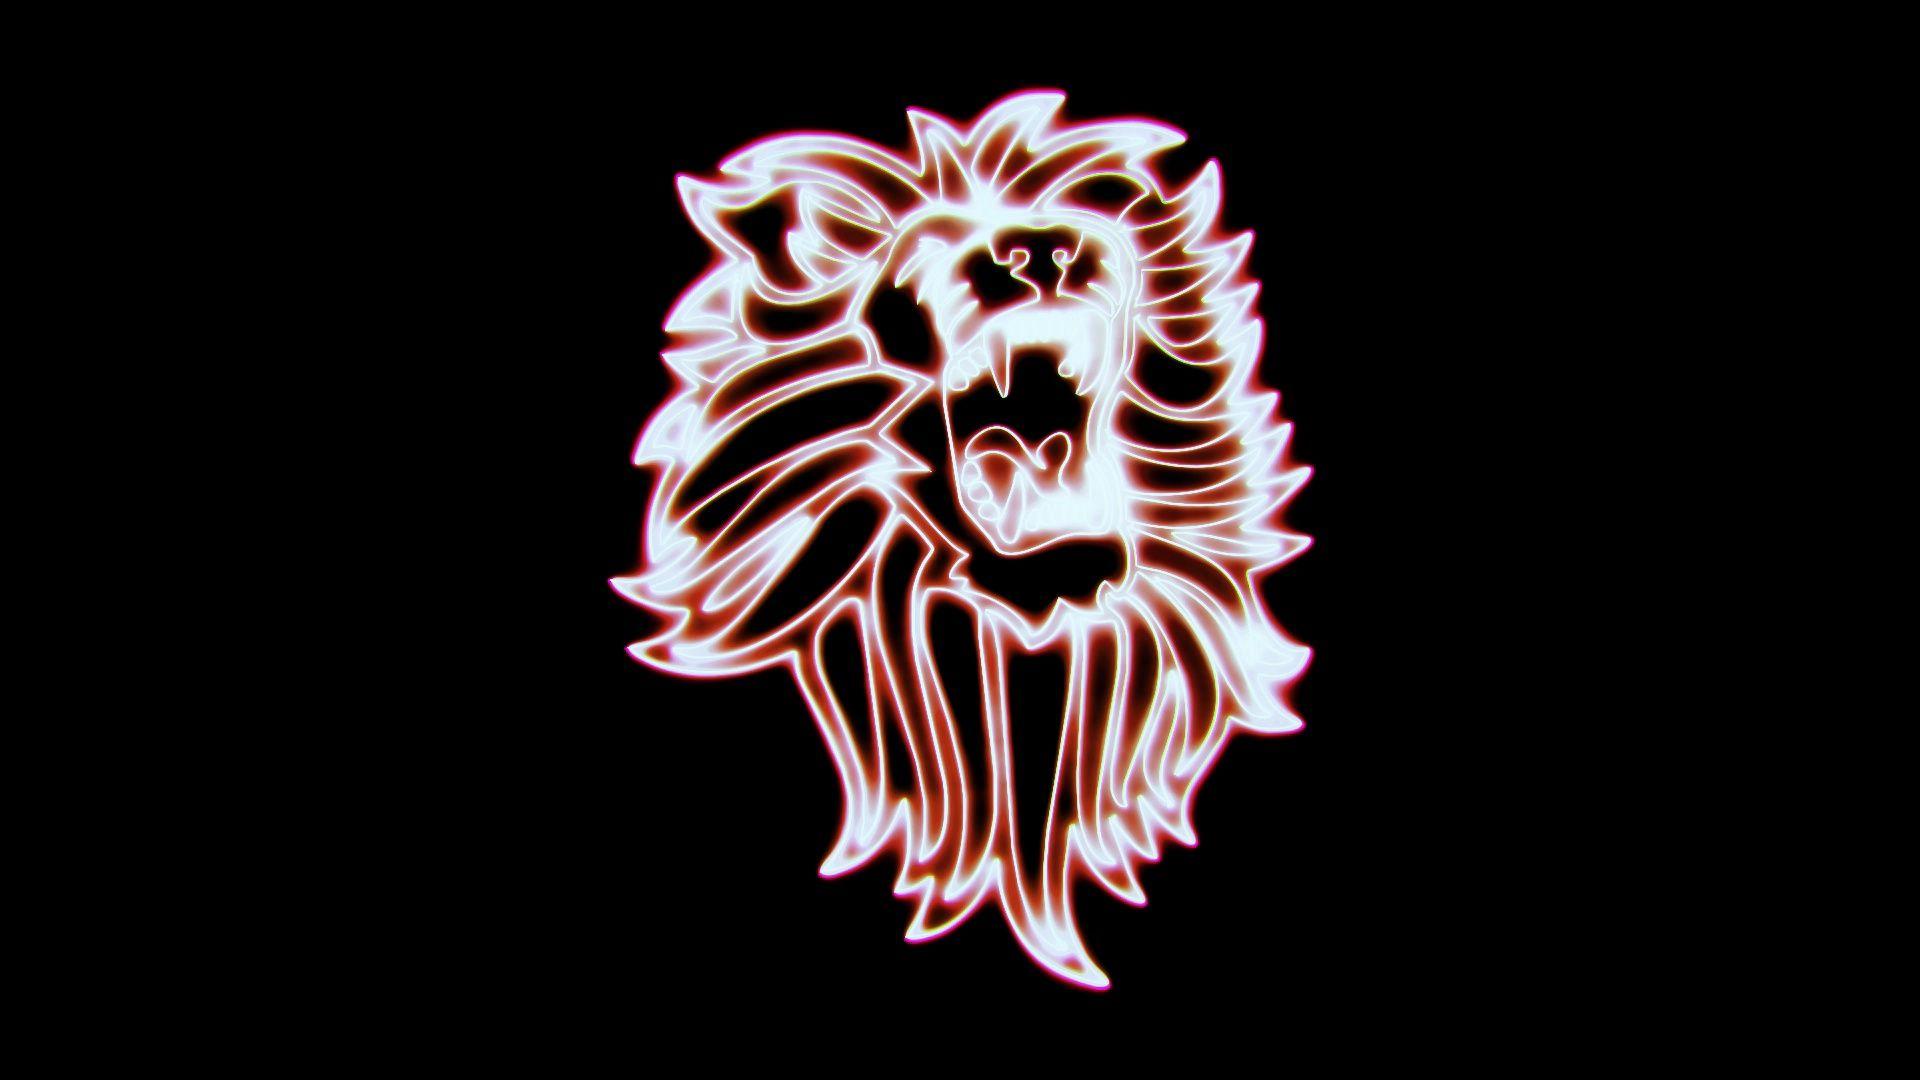 Red and White Lion Logo - Red White Lion Roaring Animated logo Loopable Graphic Element V1 ...